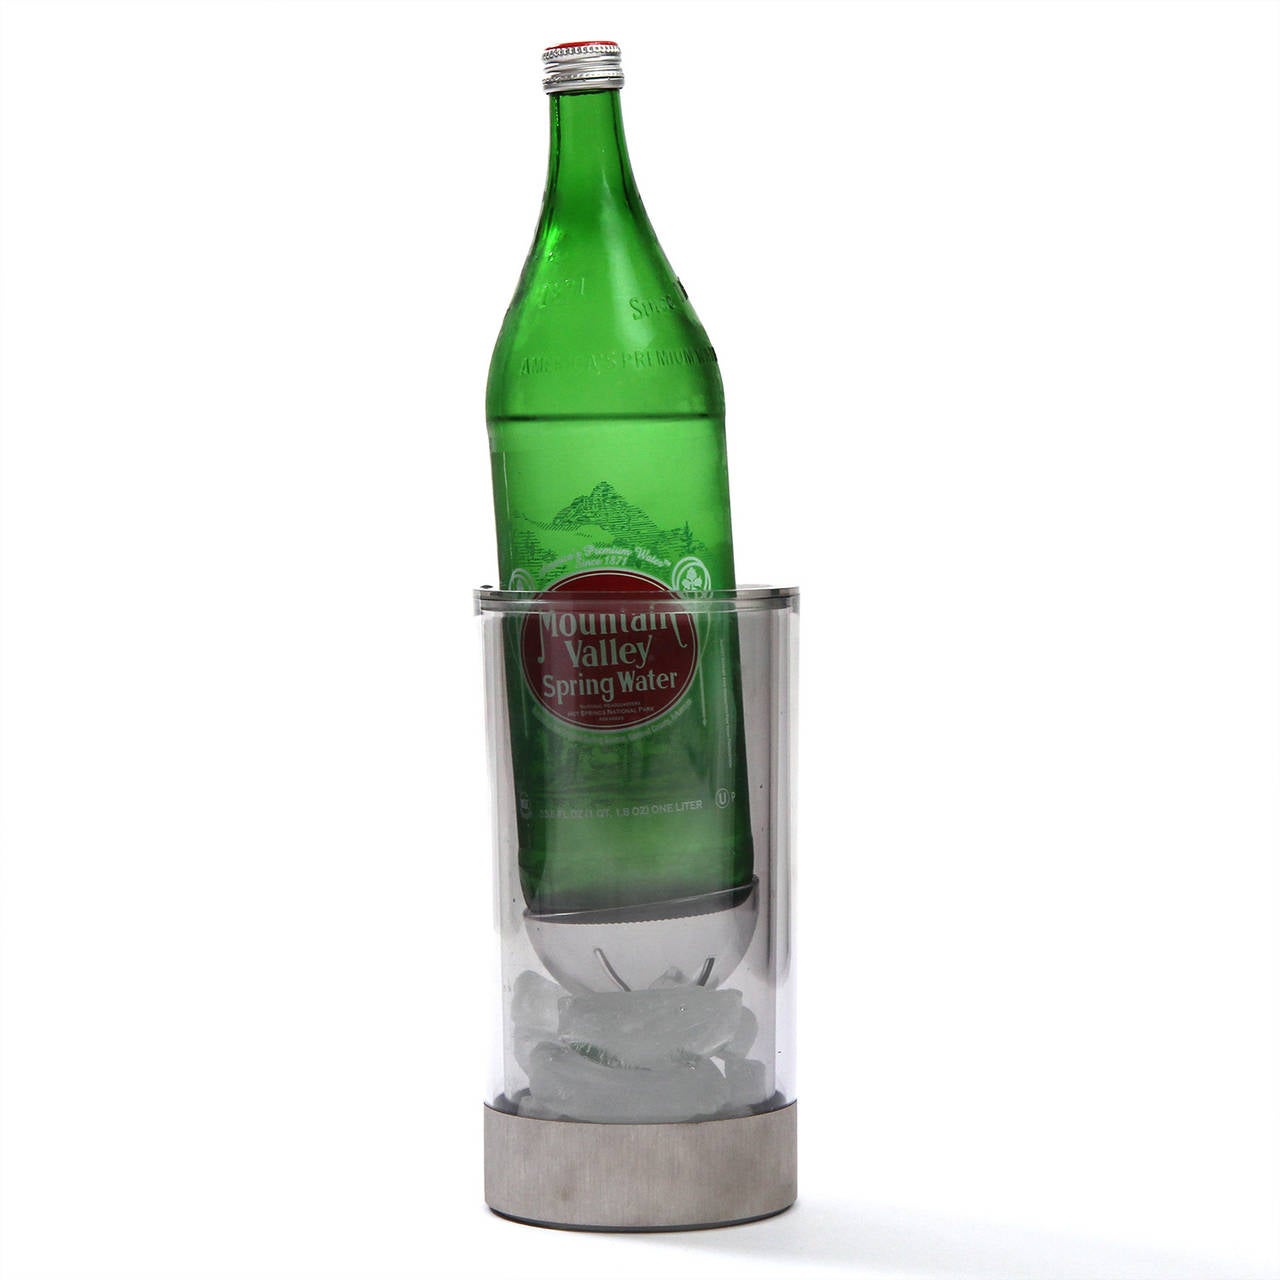 A sleek modernist bottle holder of impeccable quality crafted of thick Lucite and brushed stainless steel.